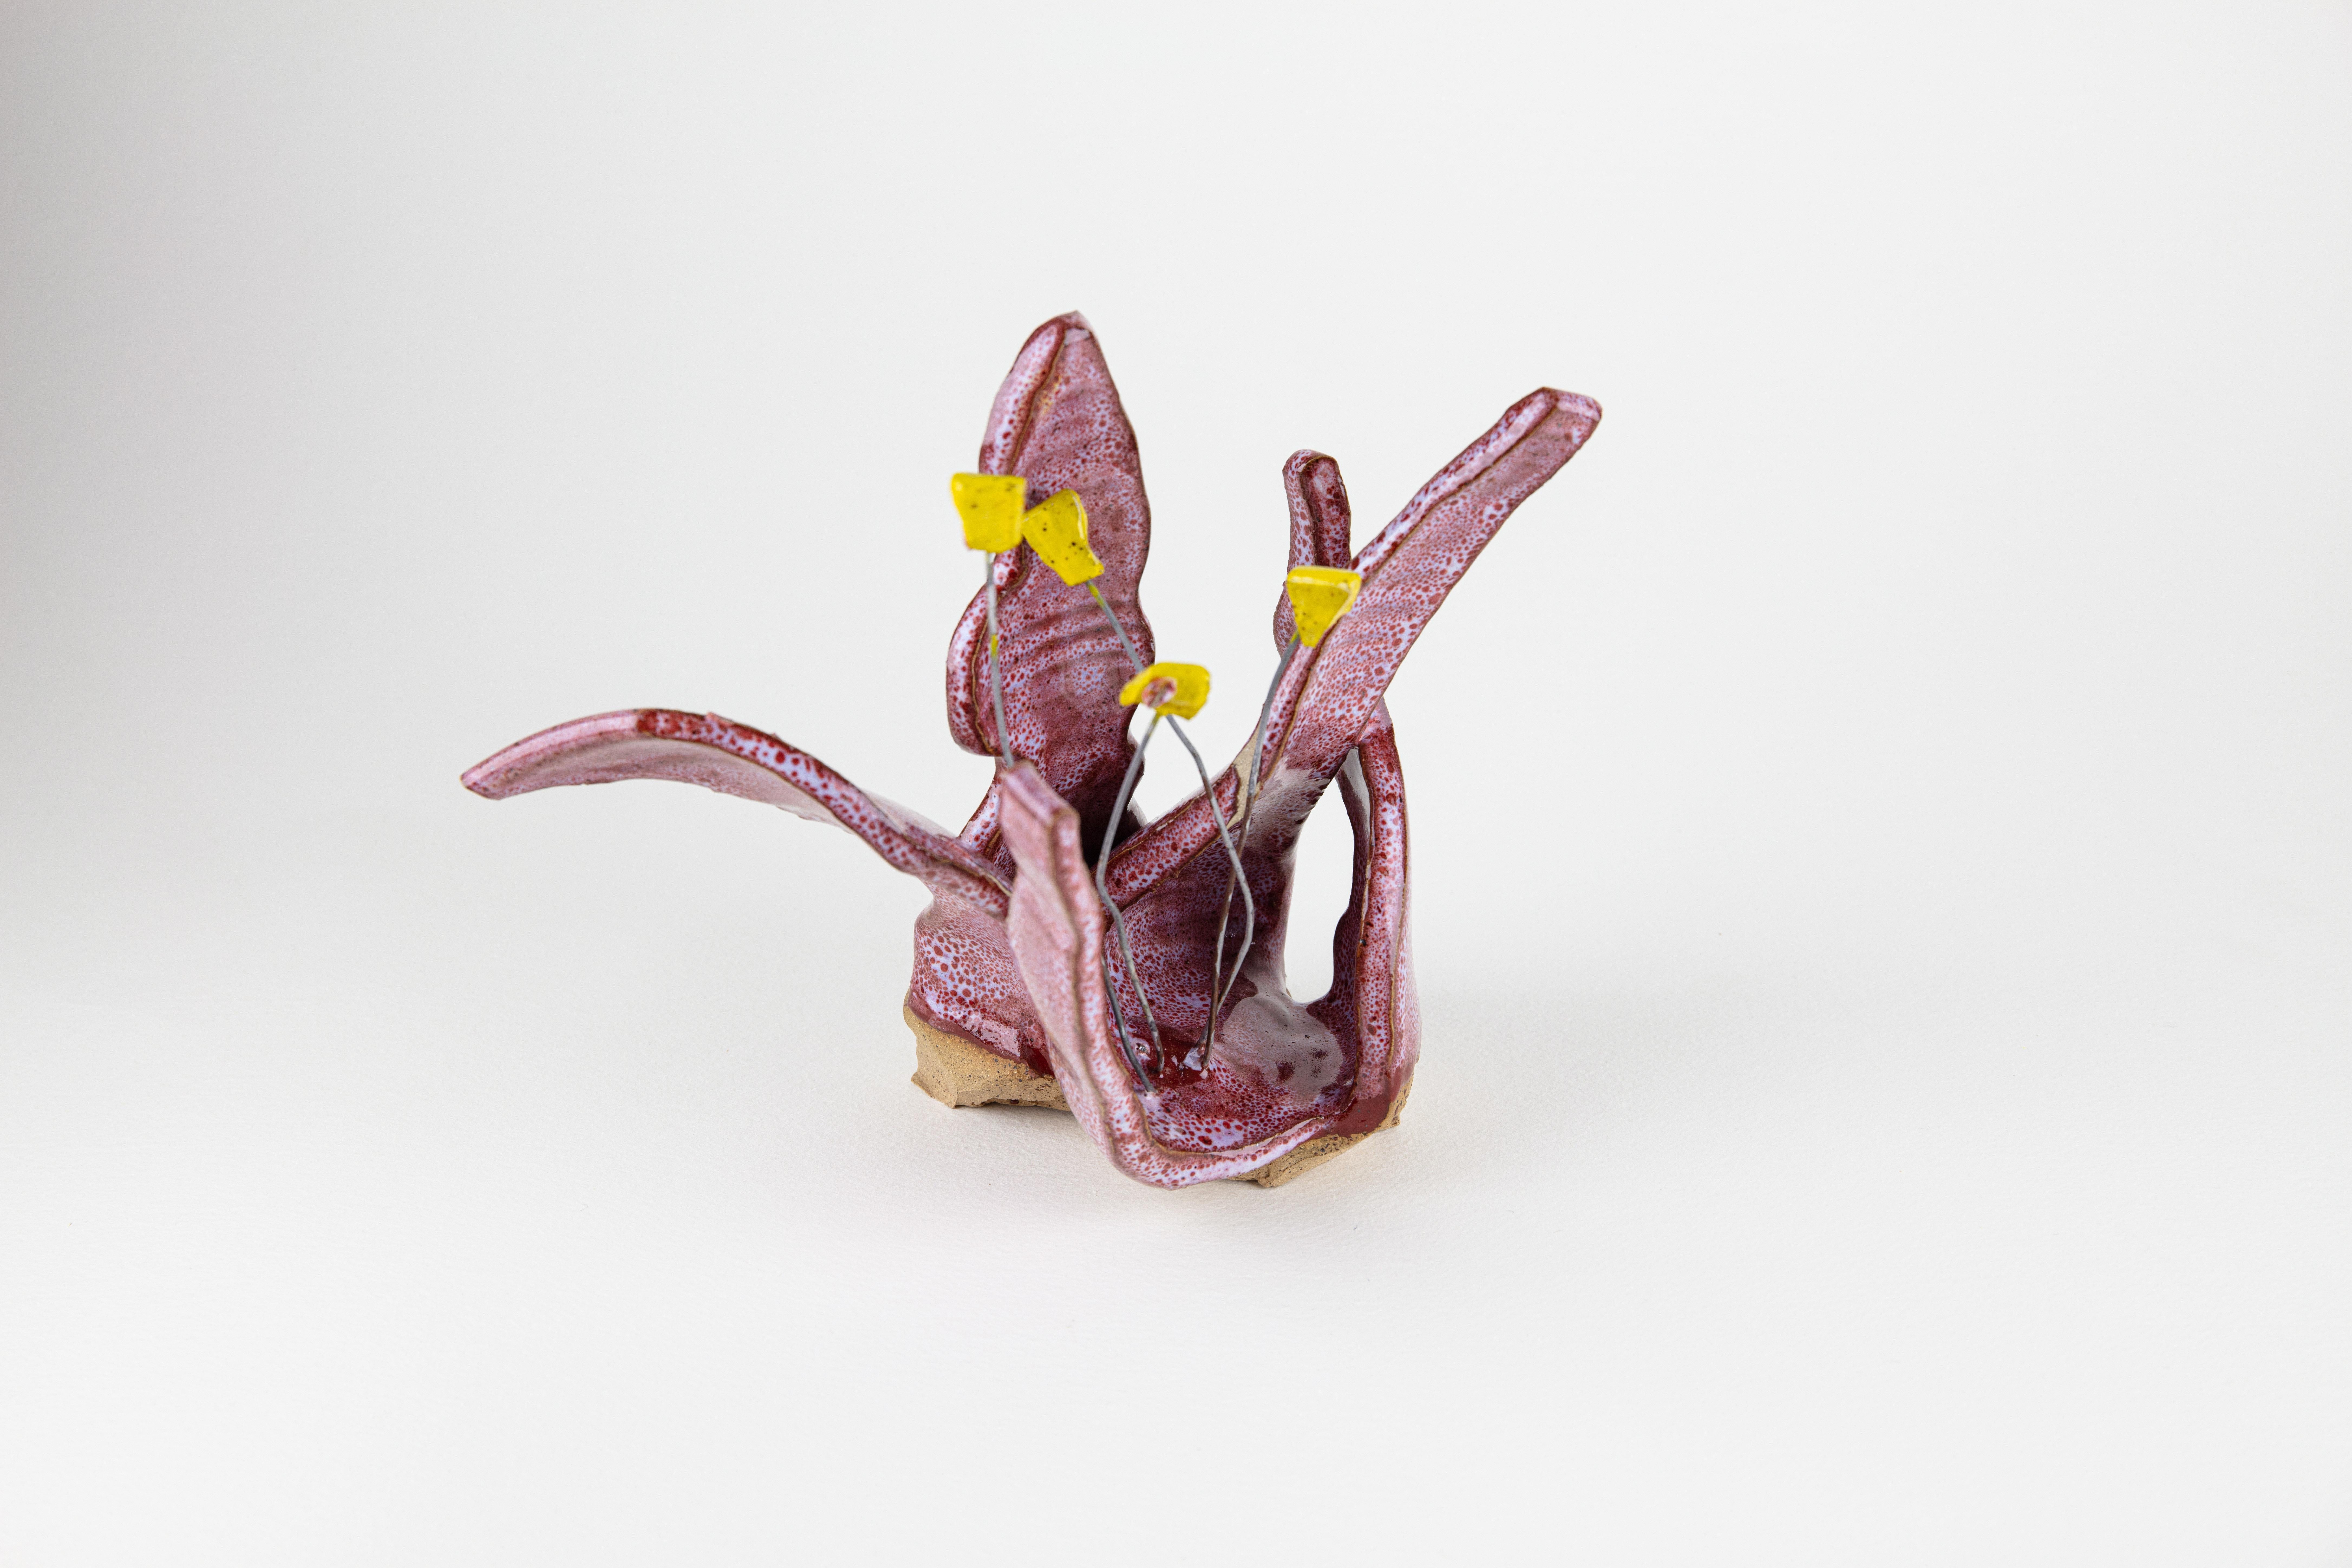 Wildflower 1, Abstract ceramic sculpture, purple and yellow flower - Contemporary Sculpture by Rachelle Krieger